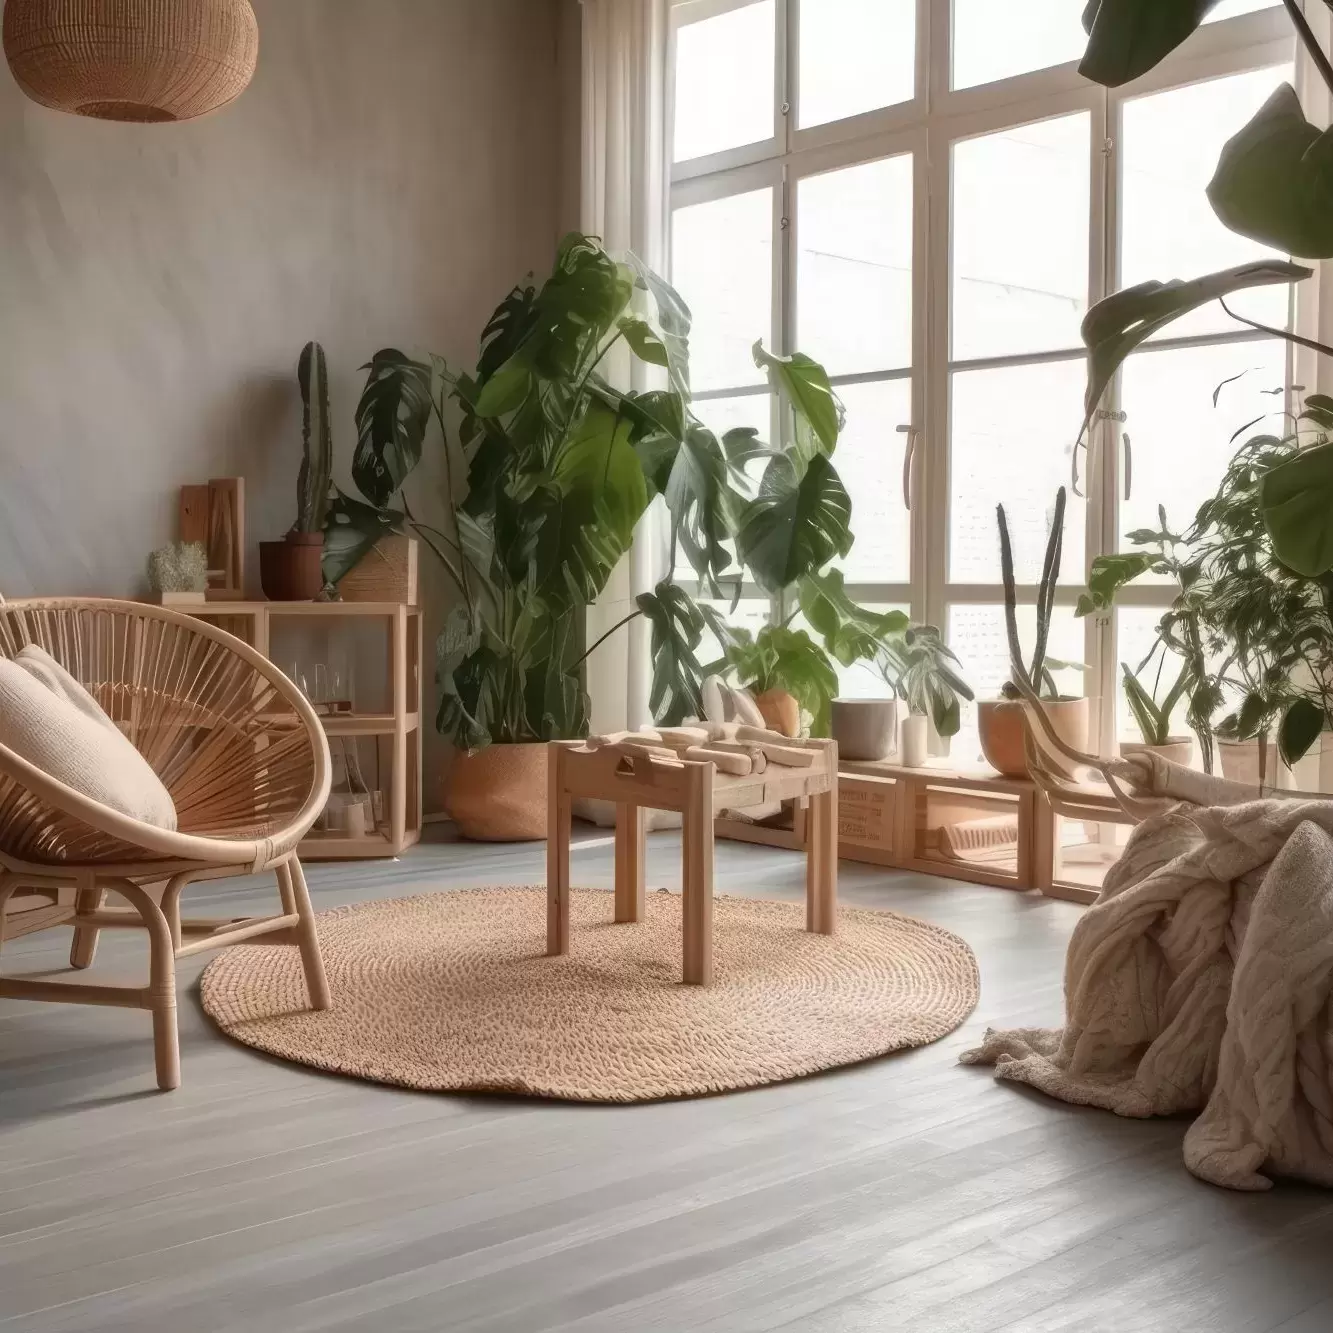 A sitting area with natural hues and indoor plants.